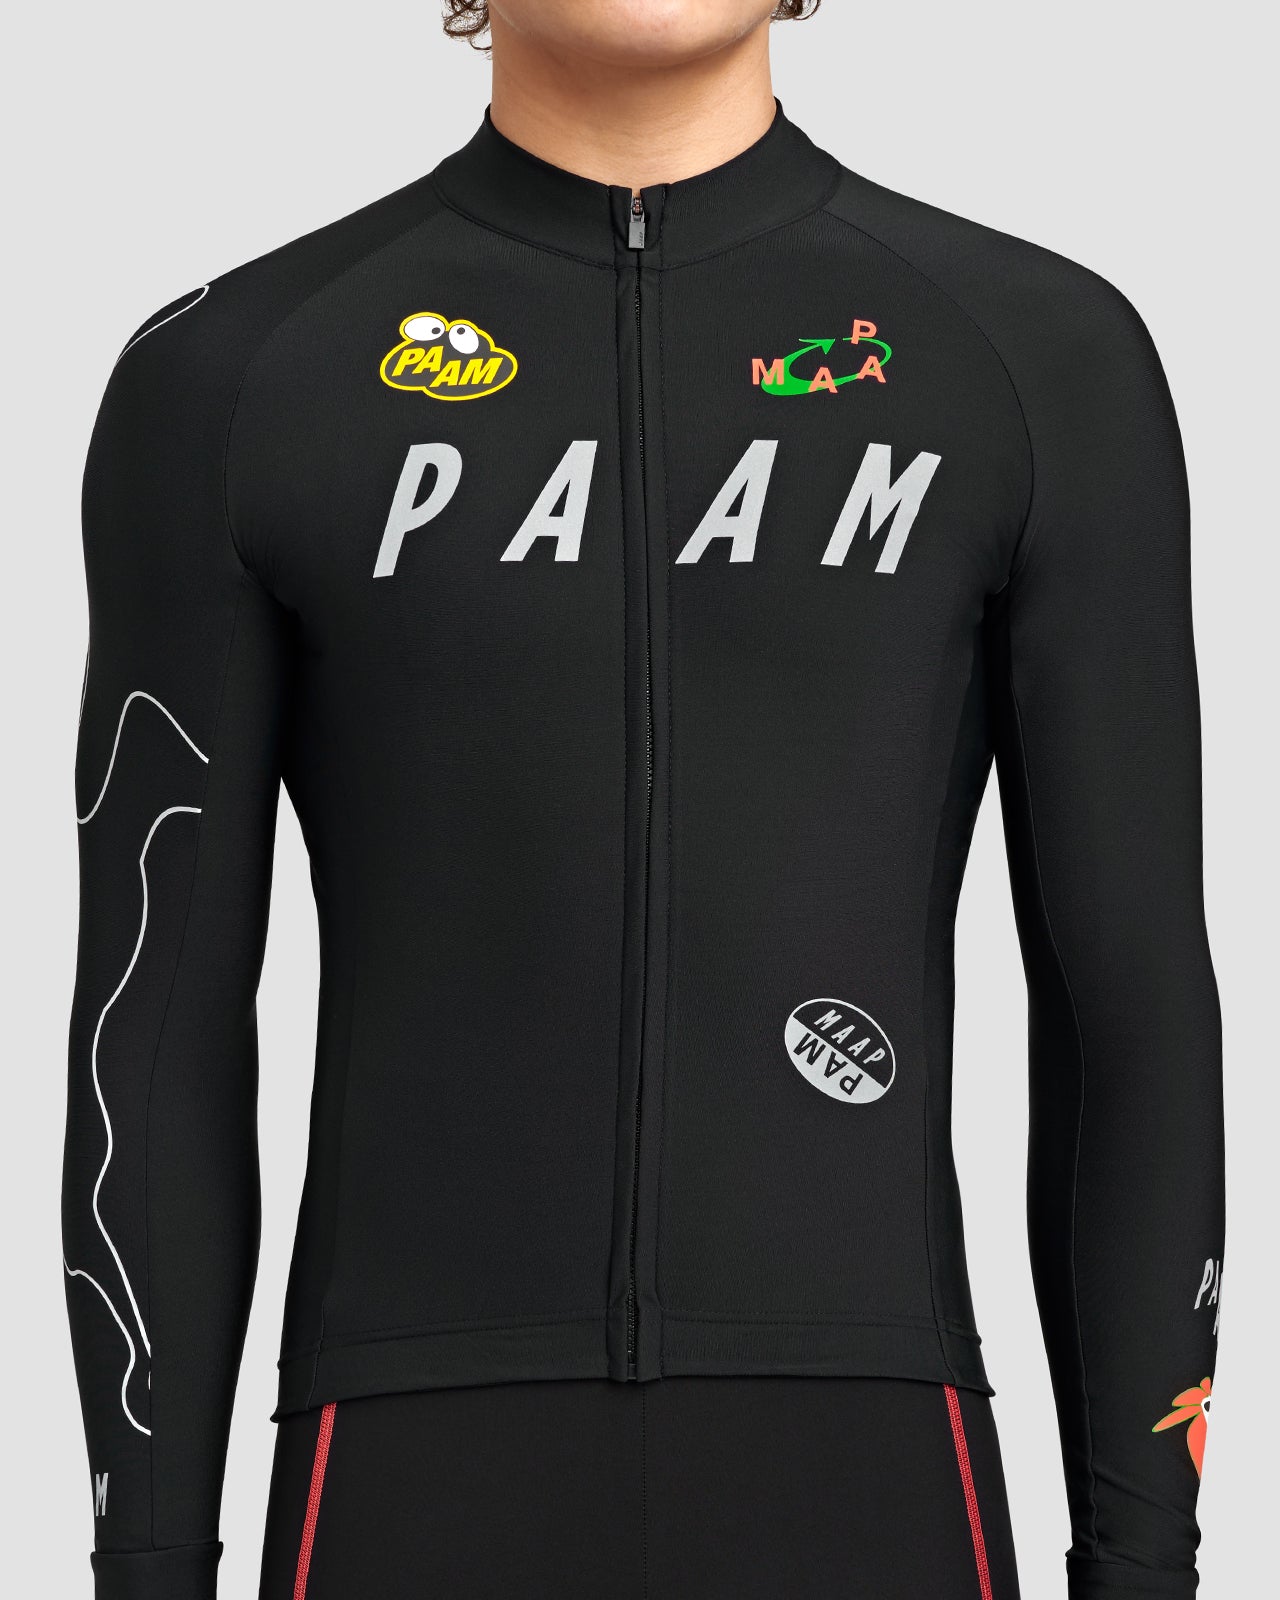 MAAP x PAM Thermal LS Jersey